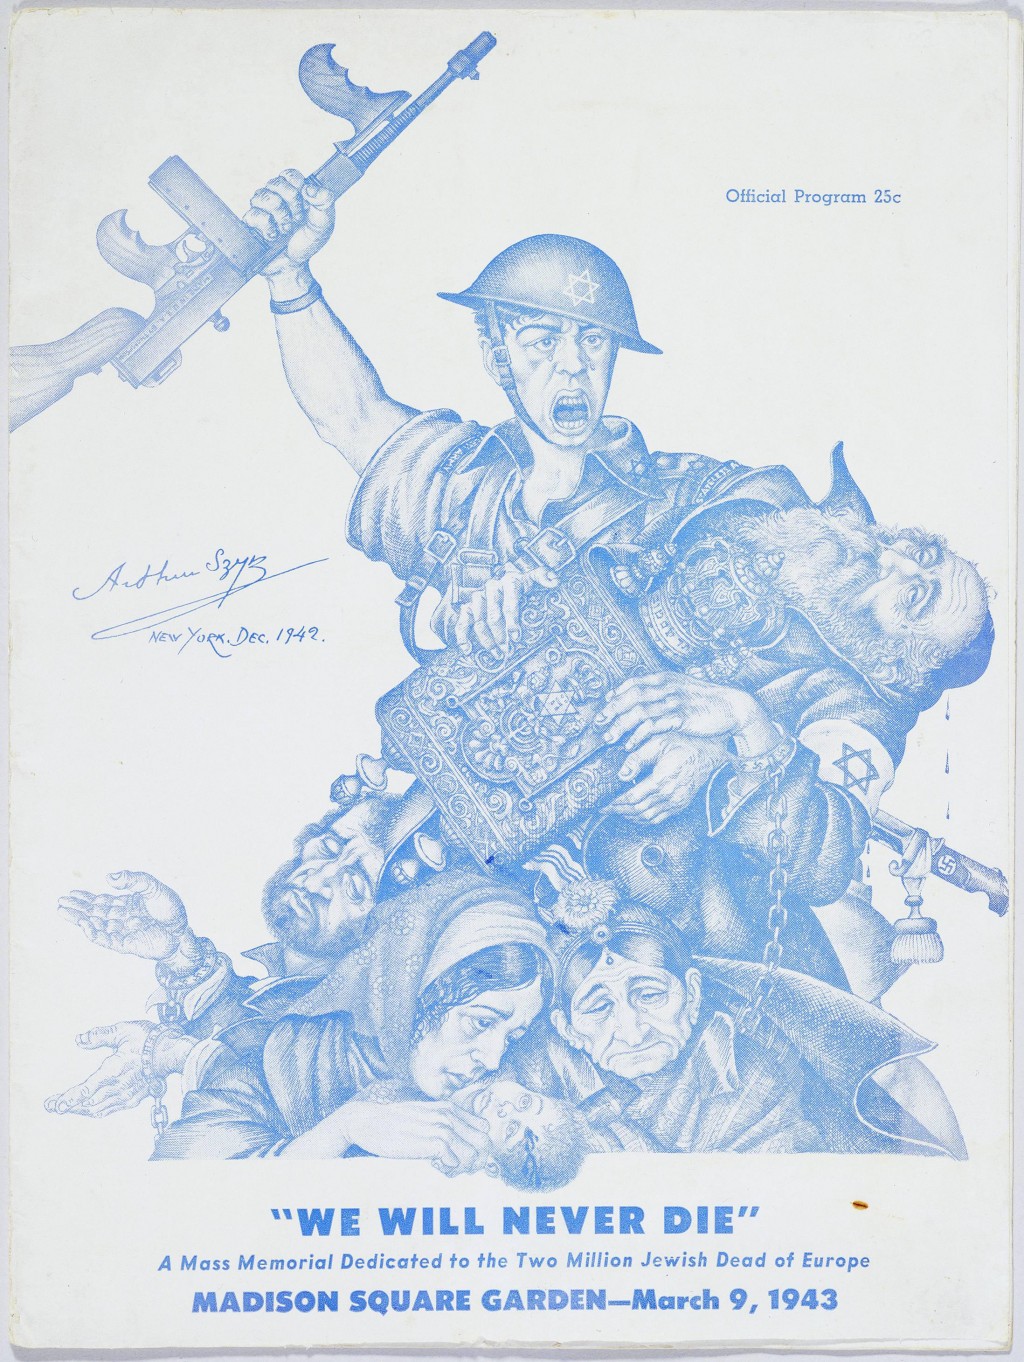 Cover of the program for 'We Will Never Die'. A soldier holds aloft a machine gun while cradling a dead or dying rabbi. Other figures, living and dead, huddle below.